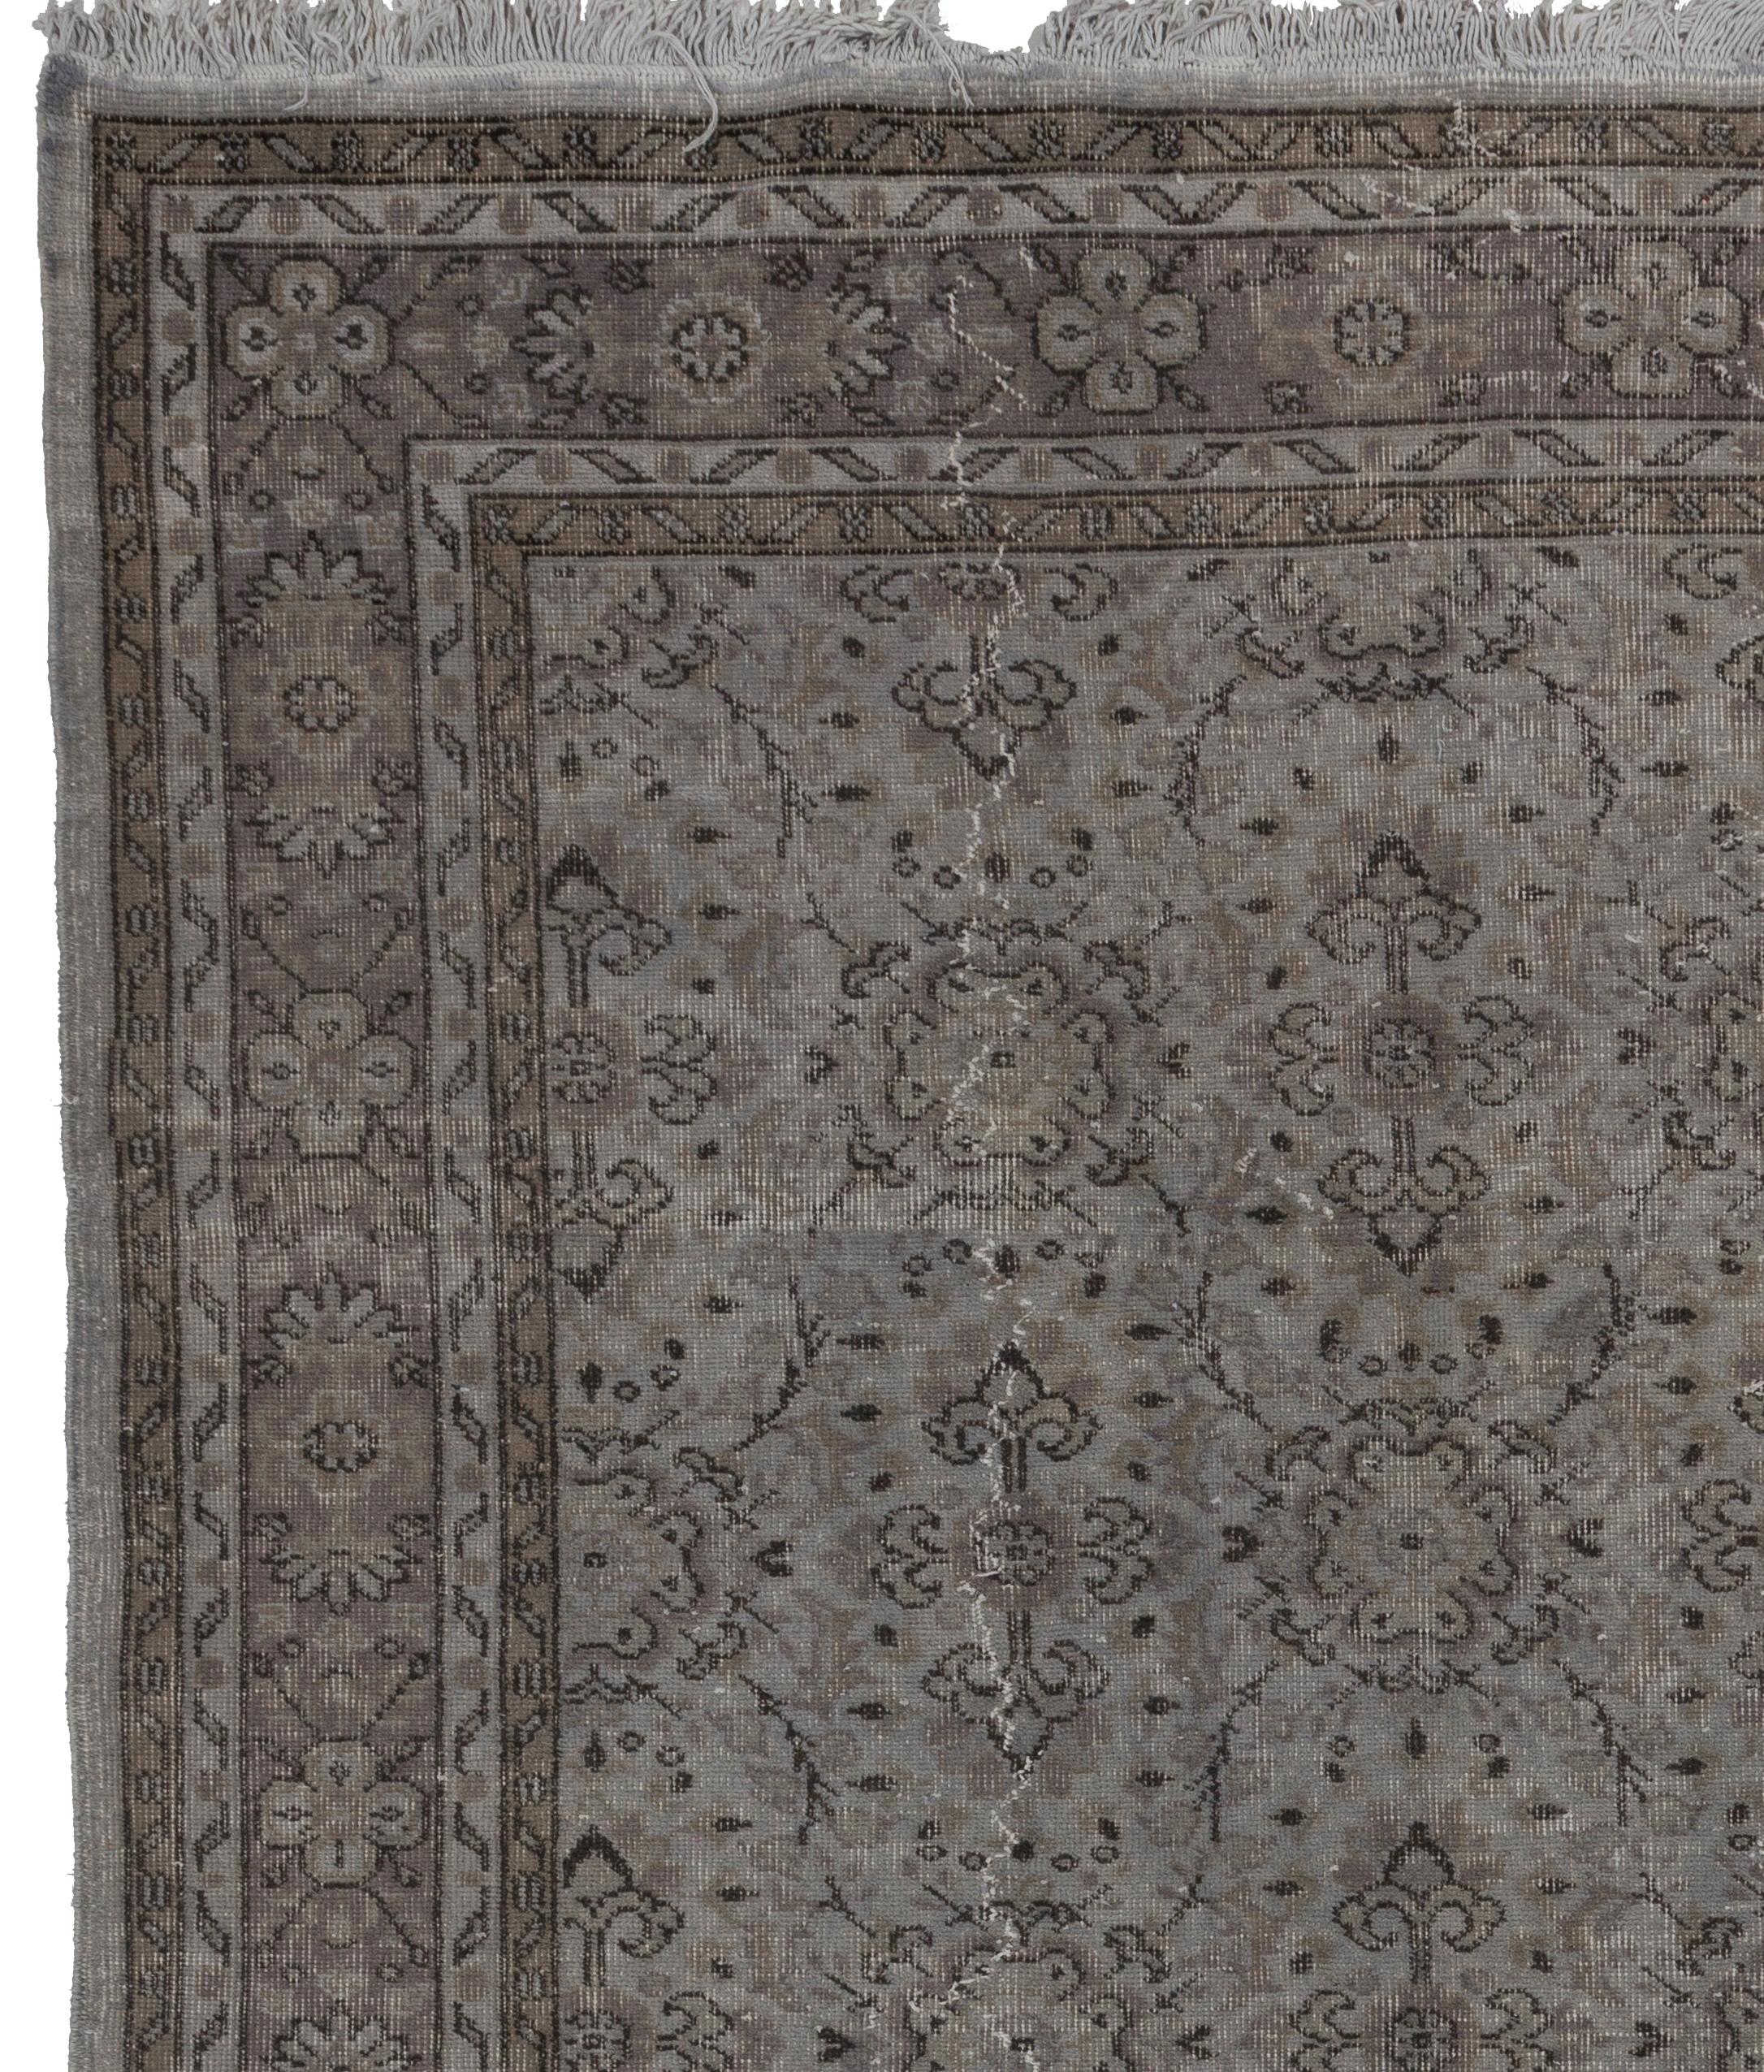 A vintage handmade Turkish area rug over-dyed in gray with an all-over floral design great for contemporary interiors. The rug is finely hand-knotted, professionally washed and has low wool pile on cotton foundation. It is sturdy and can be used on